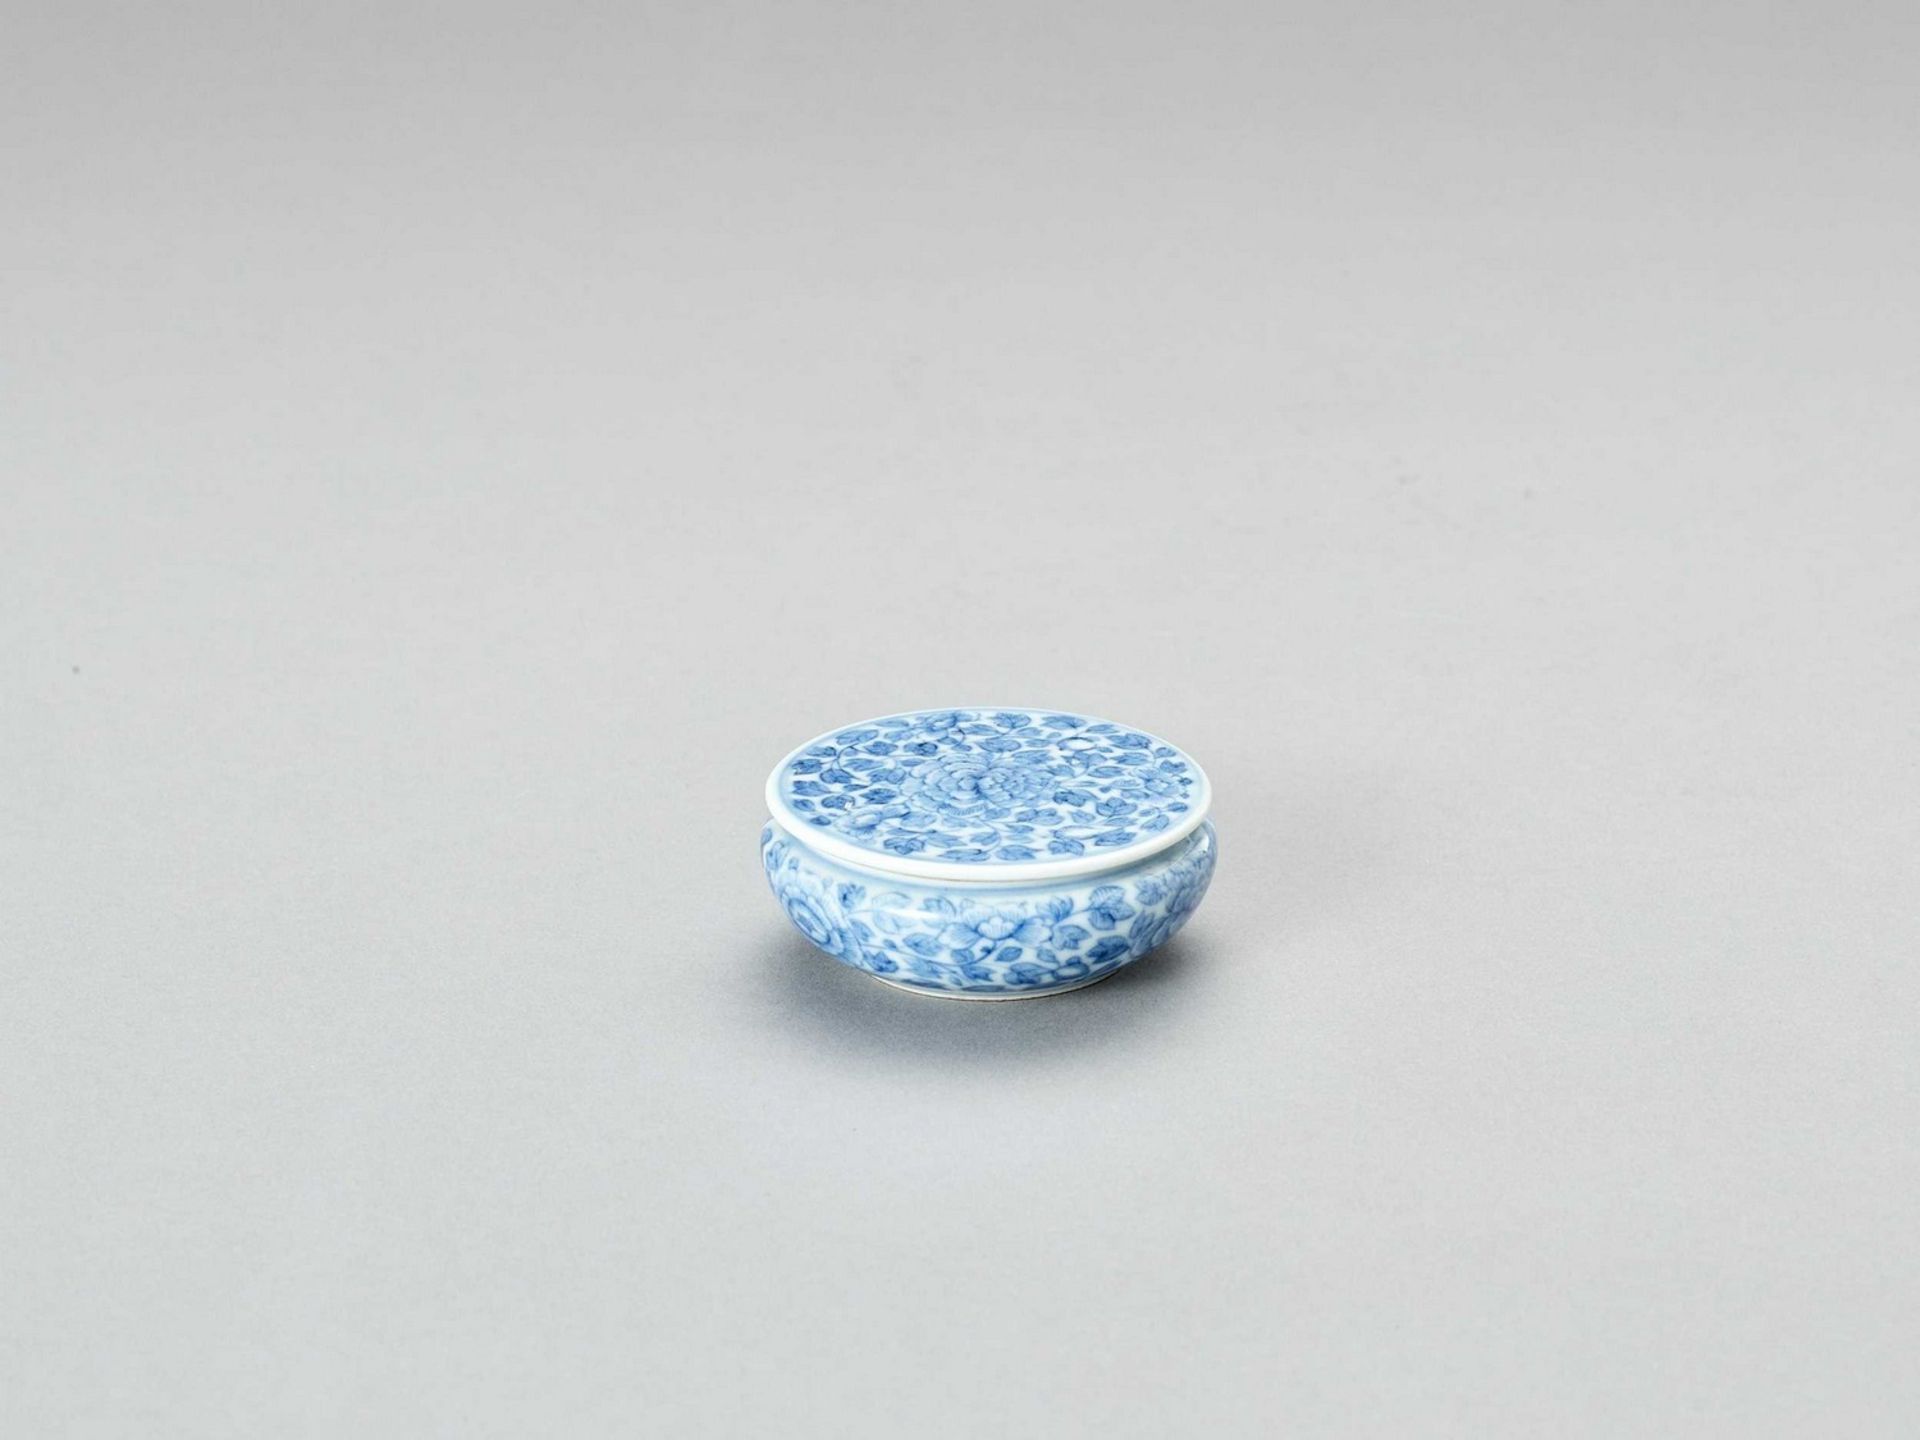 A BLUE AND WHITE PORCELAIN SEAL PASTE BOX AND COVER, LATE QING TO REPUBLIC - Image 4 of 6